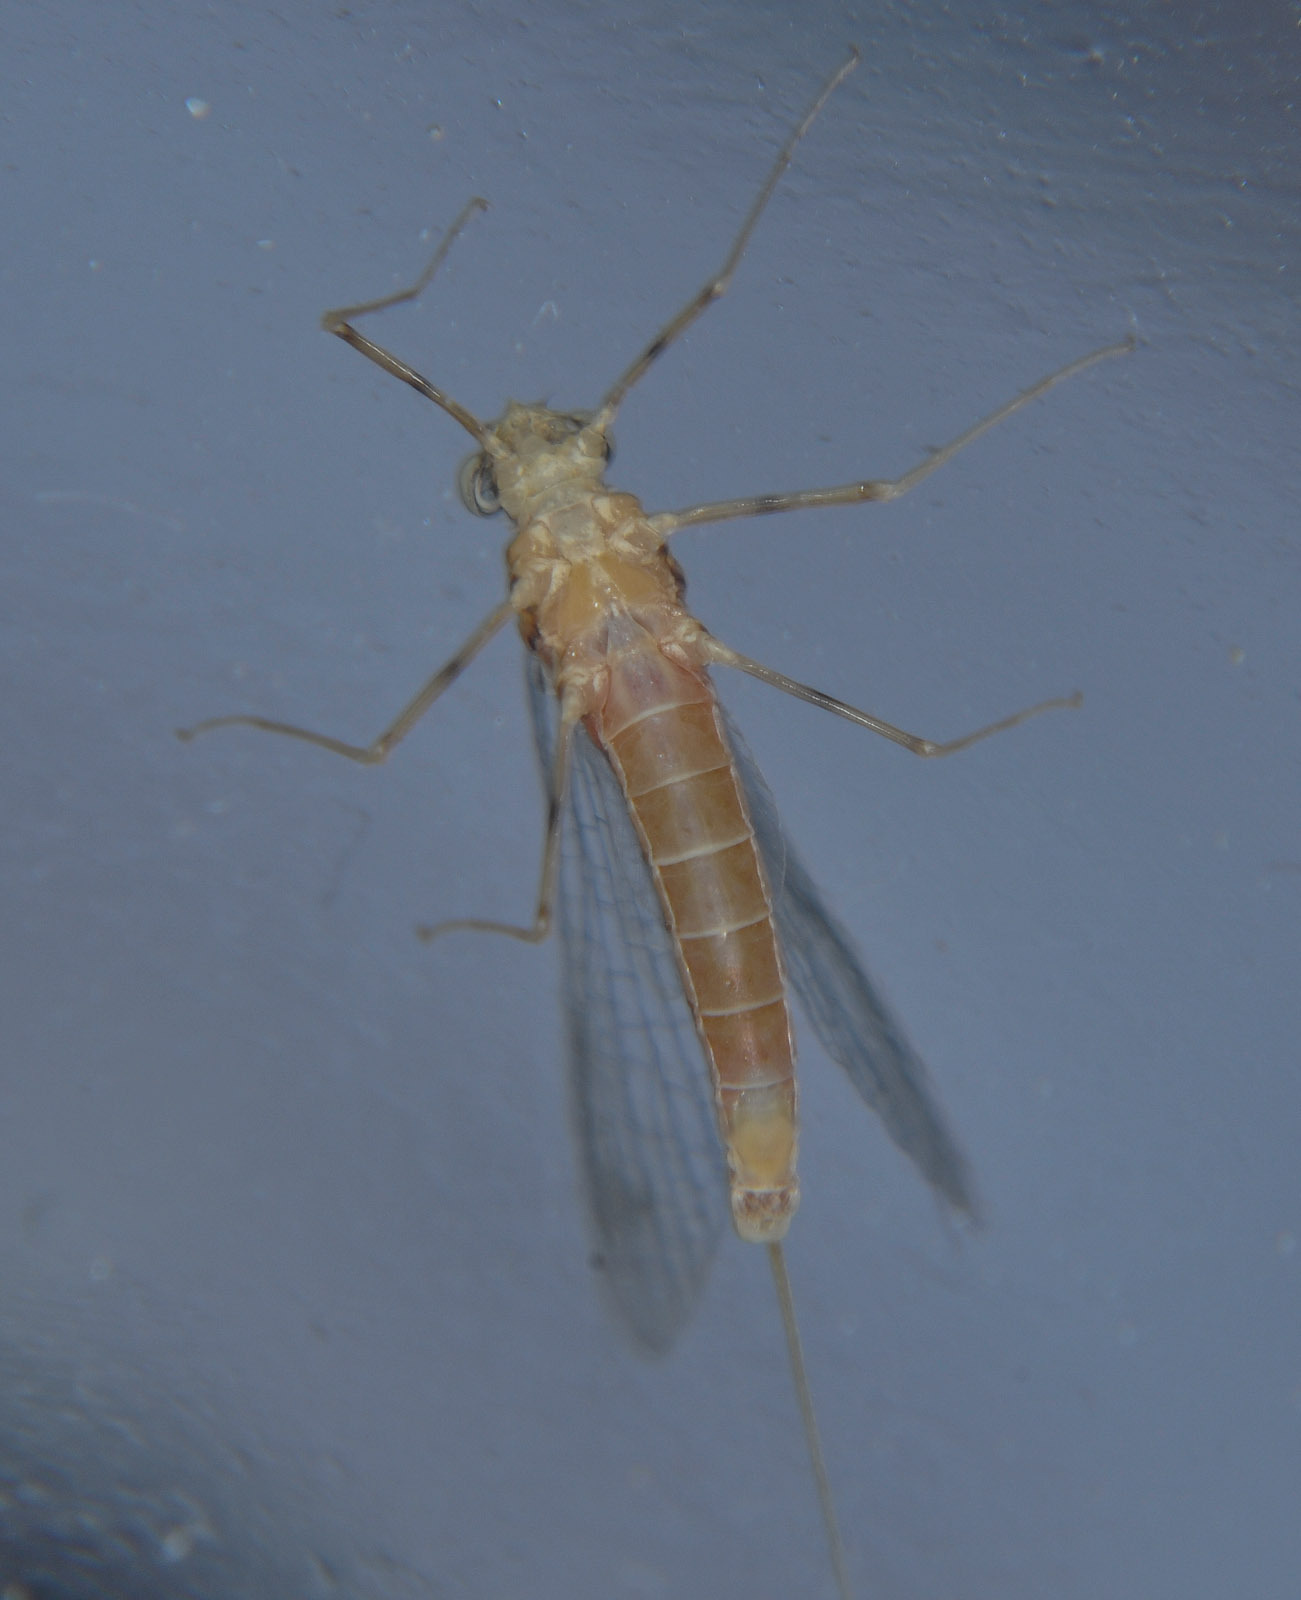 Female Epeorus longimanus (Slate Brown Dun) Mayfly Spinner from the Touchet River in Washington